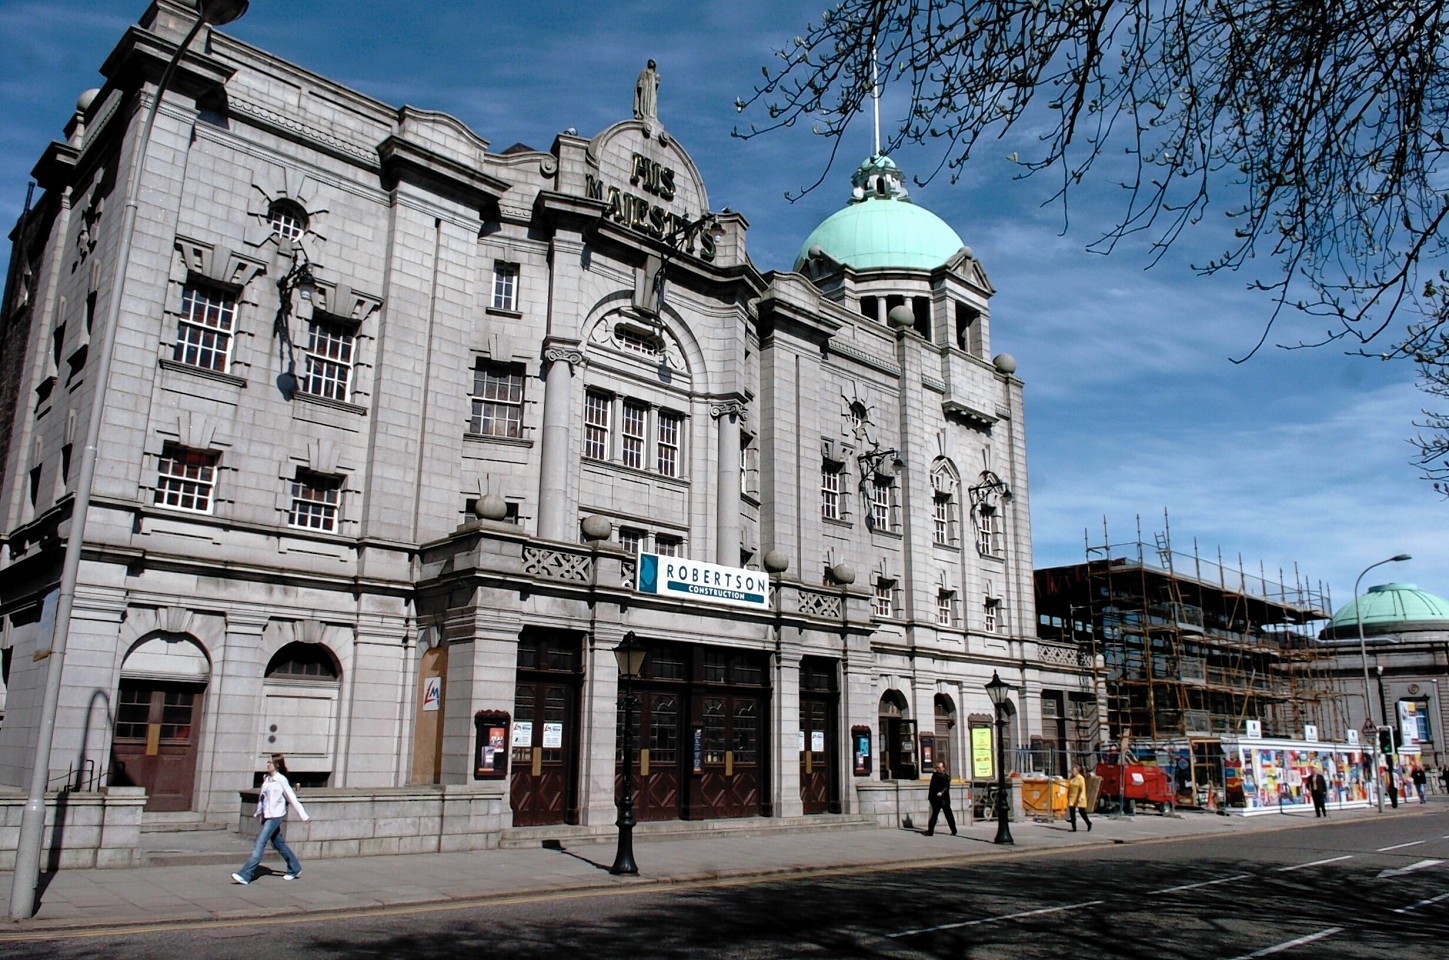 His Majesty's Theatre will be one of the buildings taking part in the Granite Video project